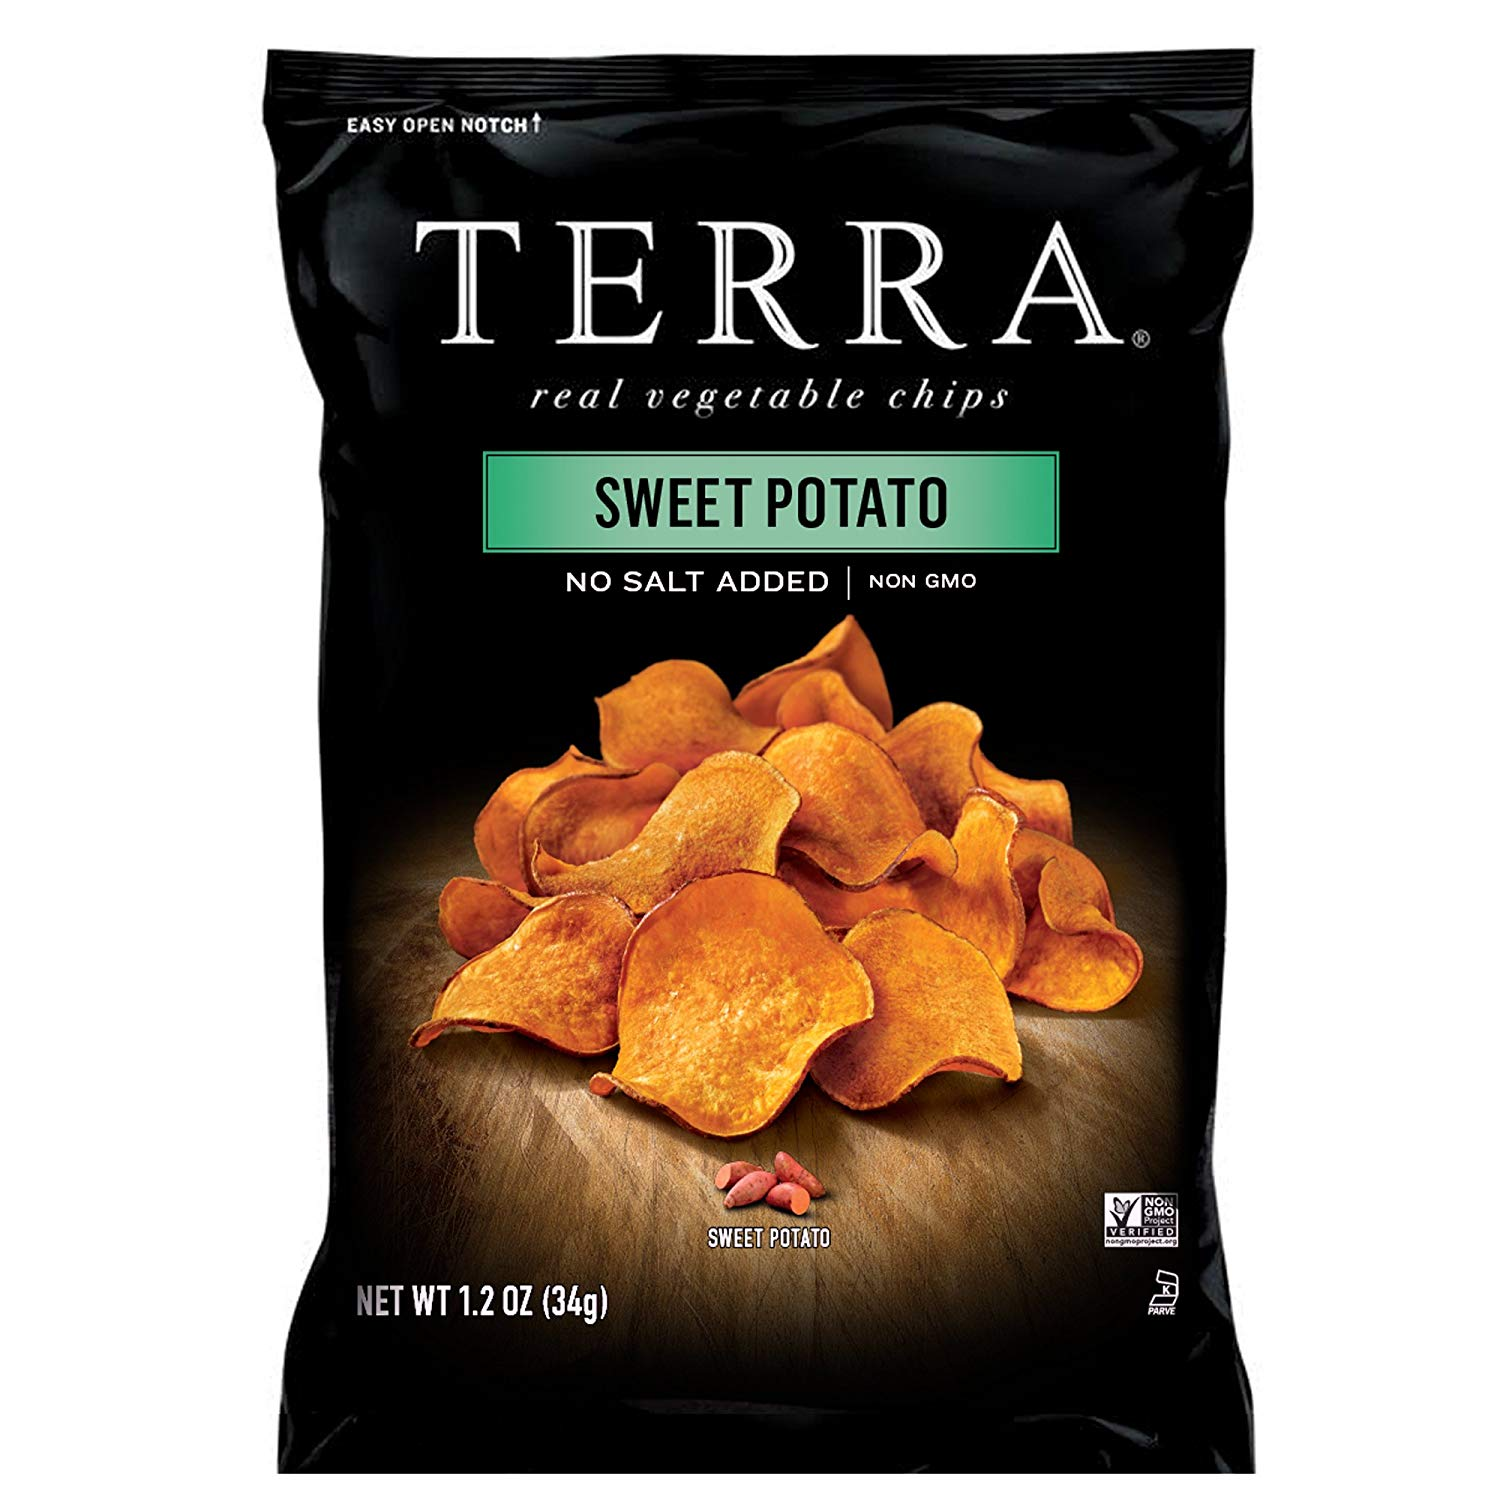 TERRA Sweet Potato Chips (Pack of 24) Only $11.77 Shipped!